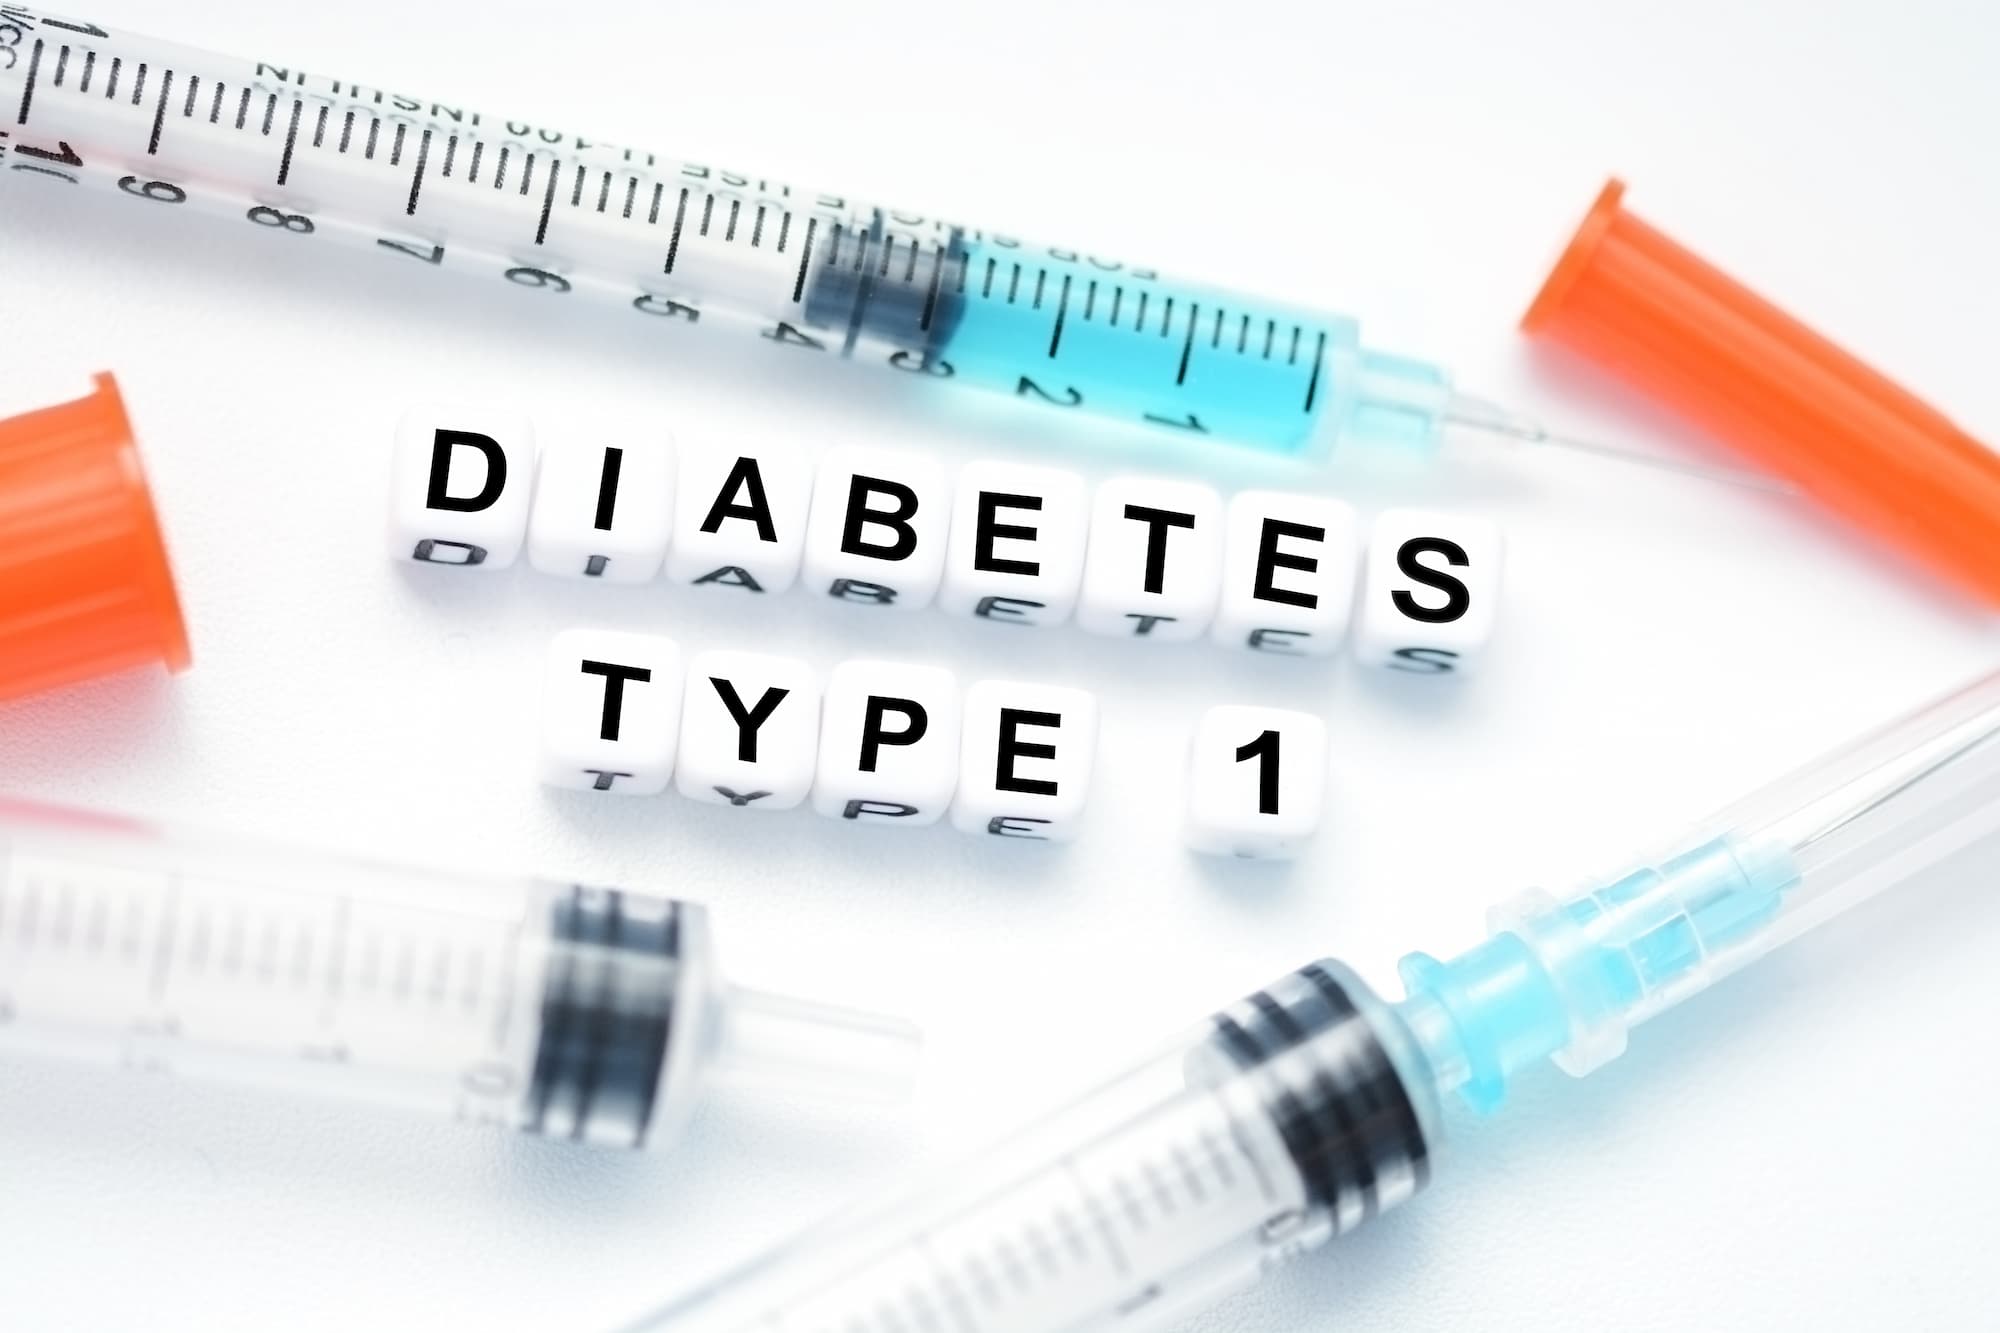 newest type 1 diabetes research